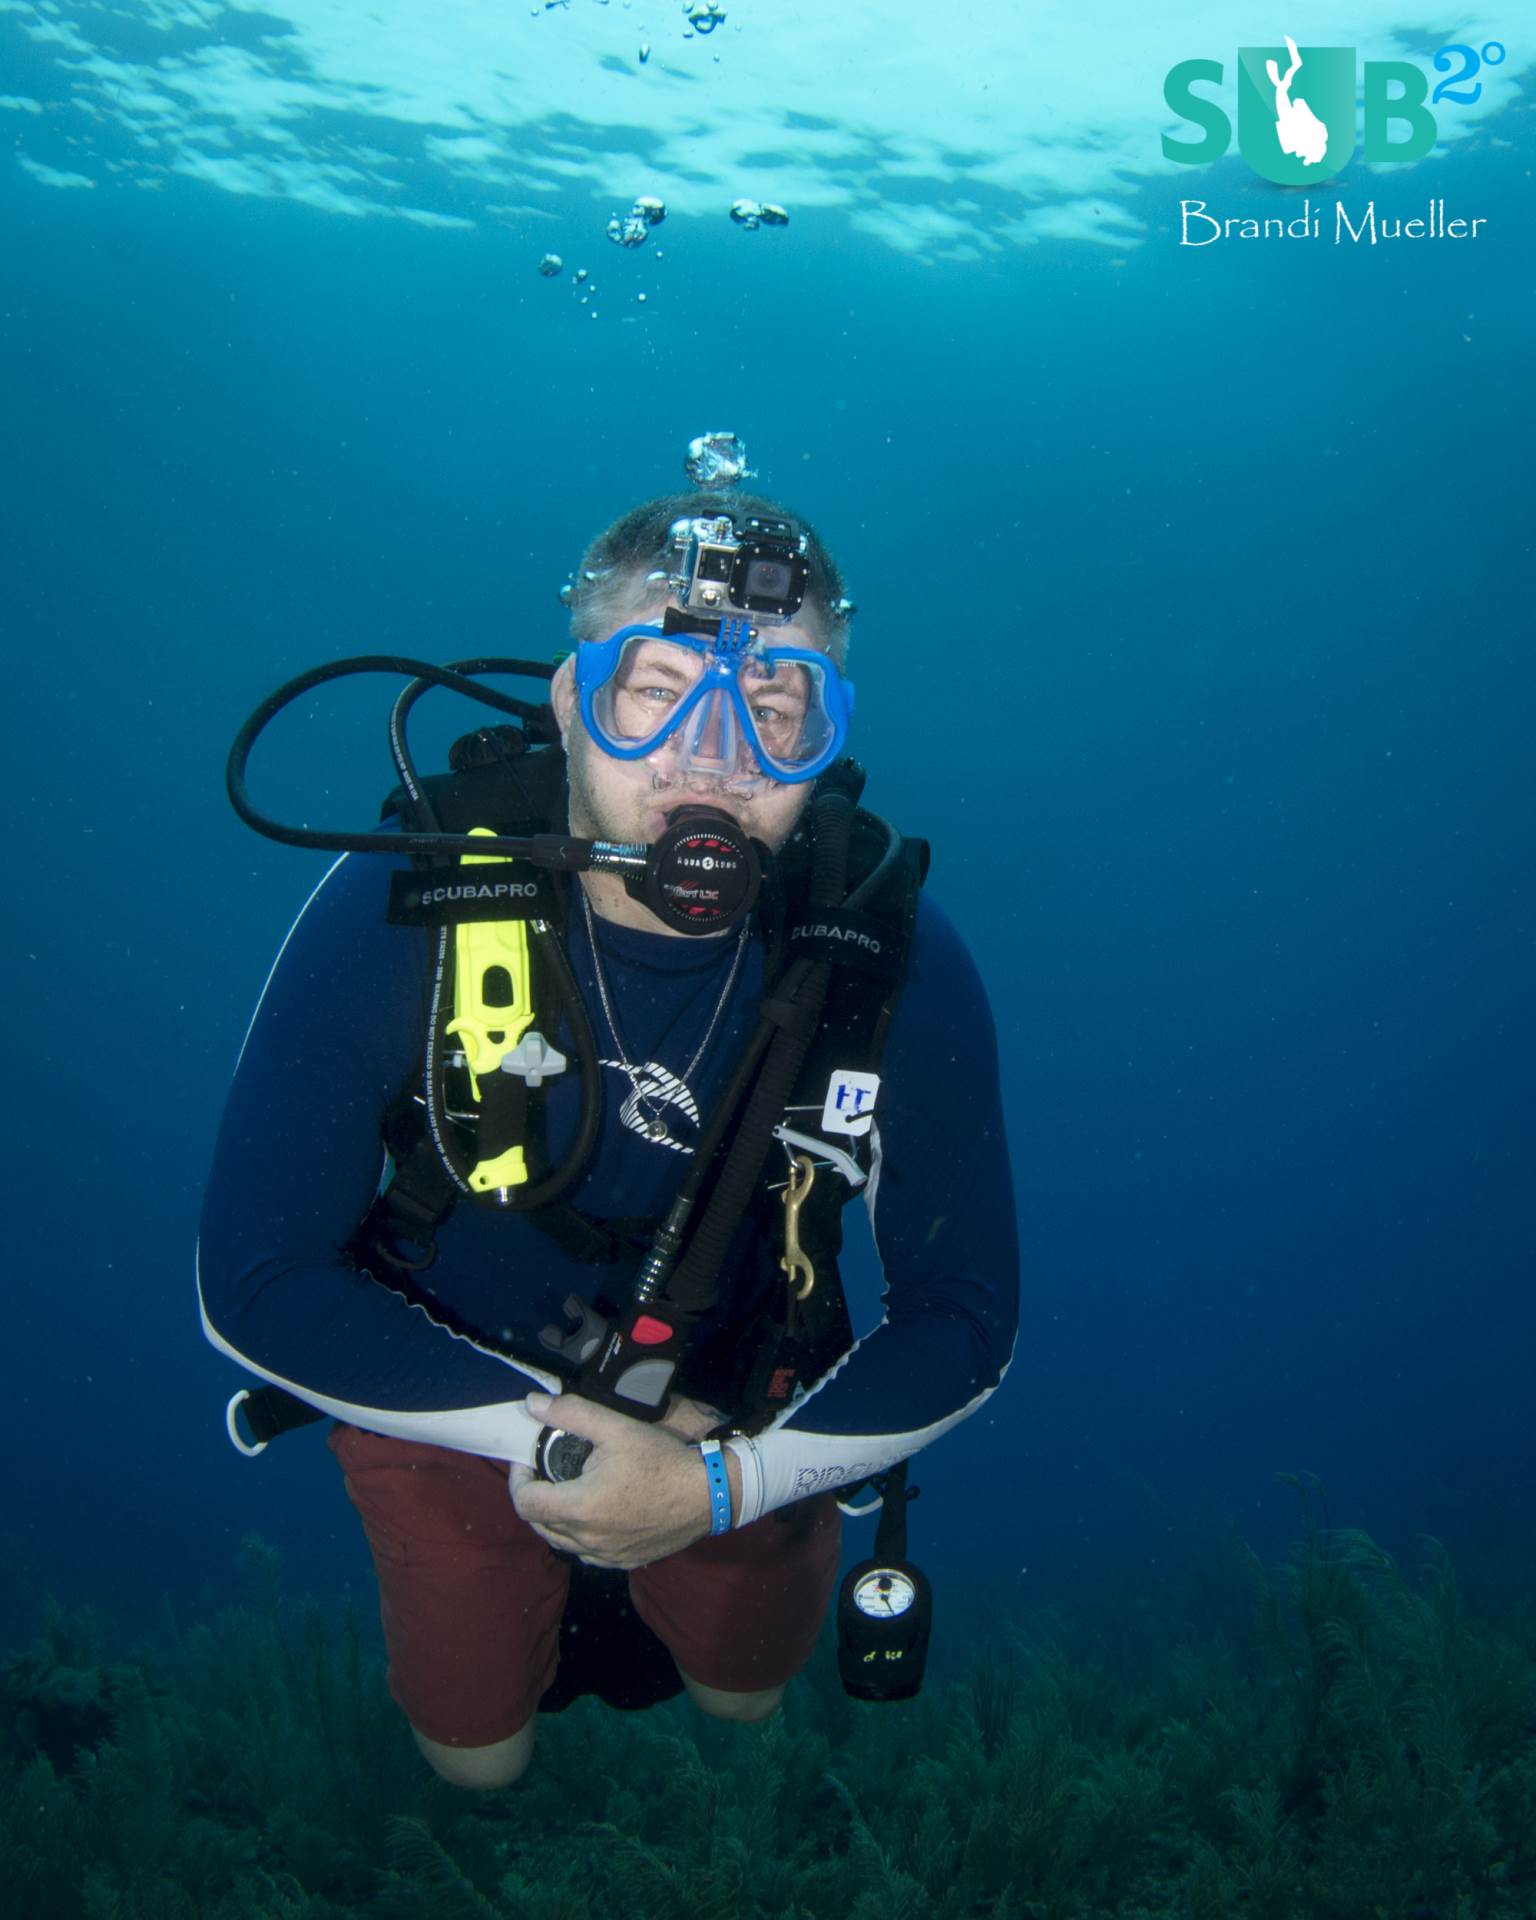 My dive buddy Mike with the Sandmarc Aqua Mask.